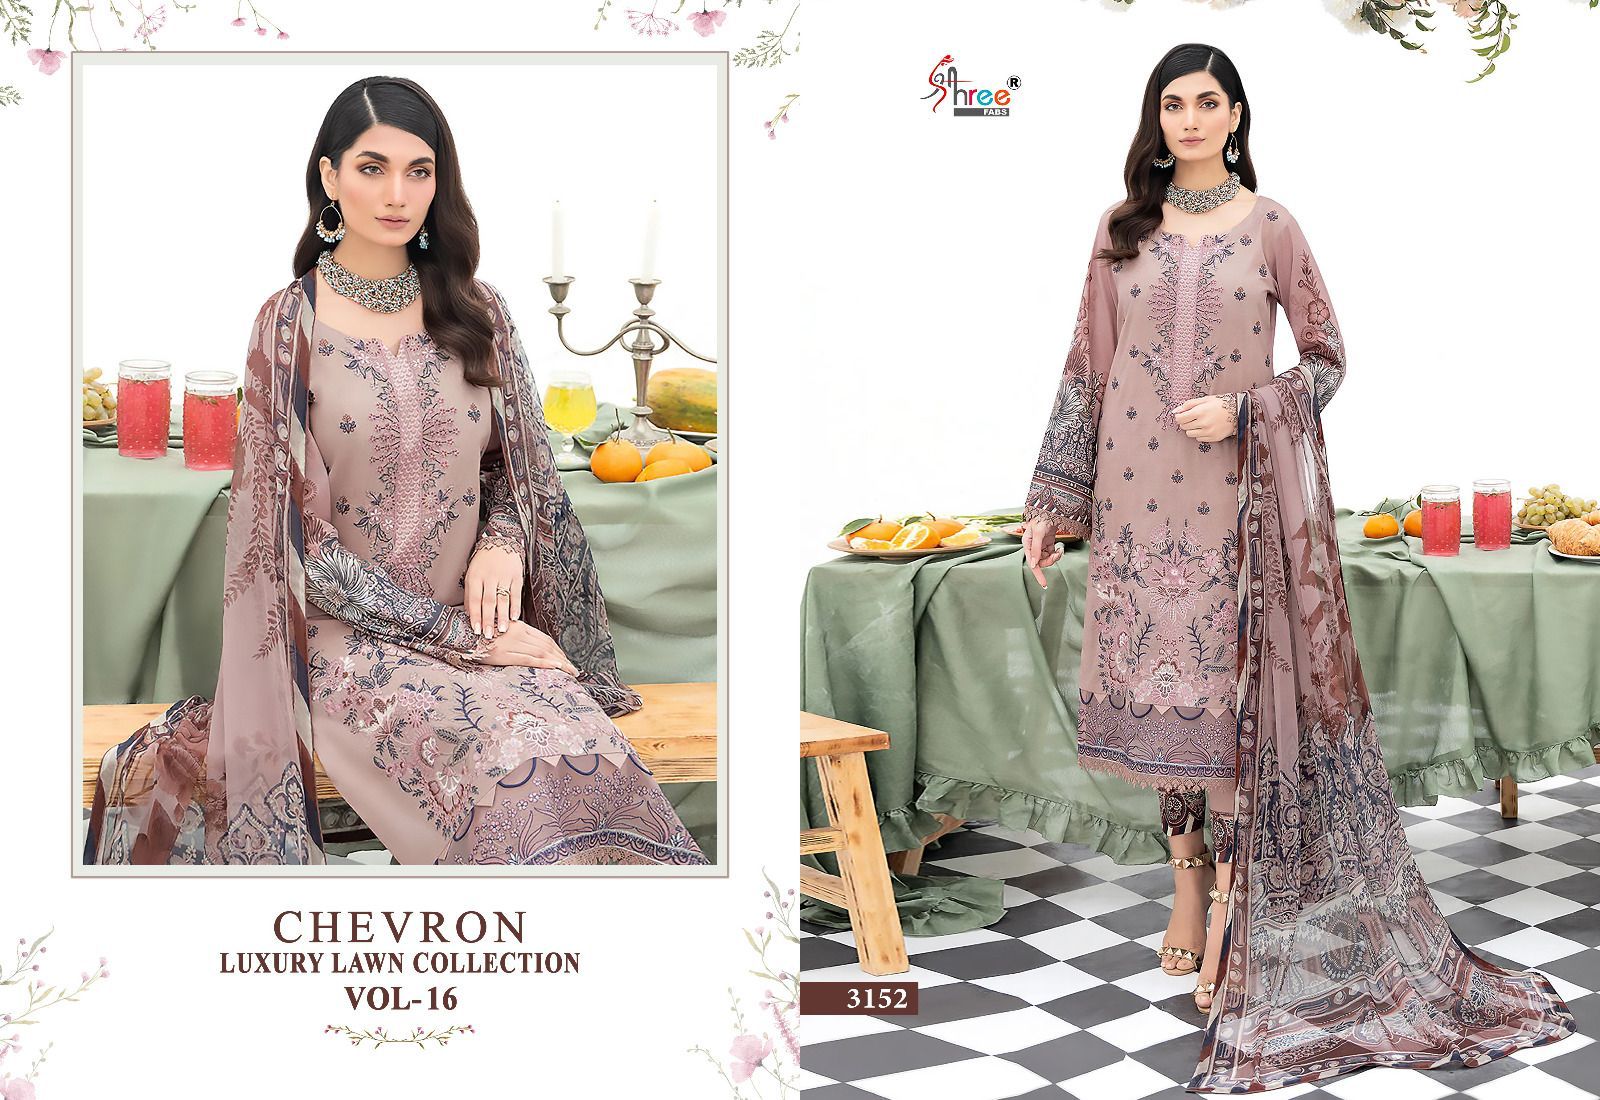 Shree Chevron Luxury Lawn Collection Vol 16 collection 7